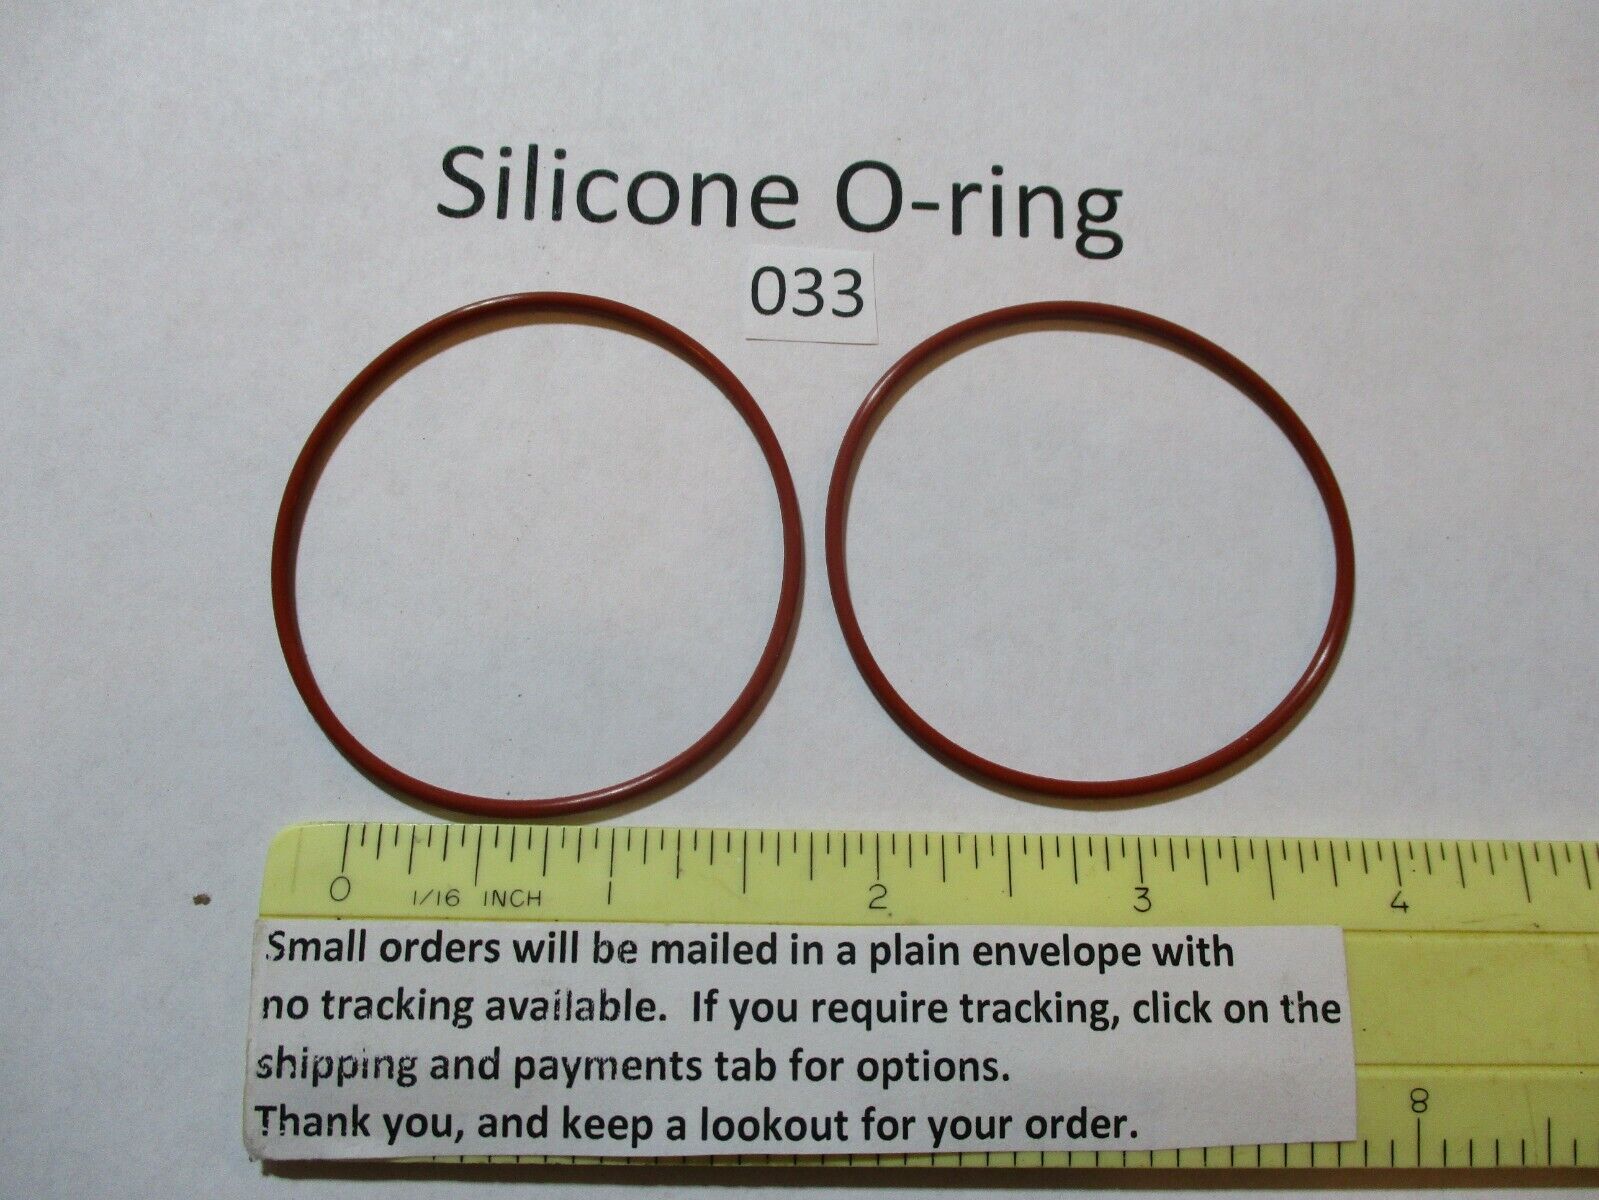 033 Silicone O-ring Austin Mall 70 durometer 2